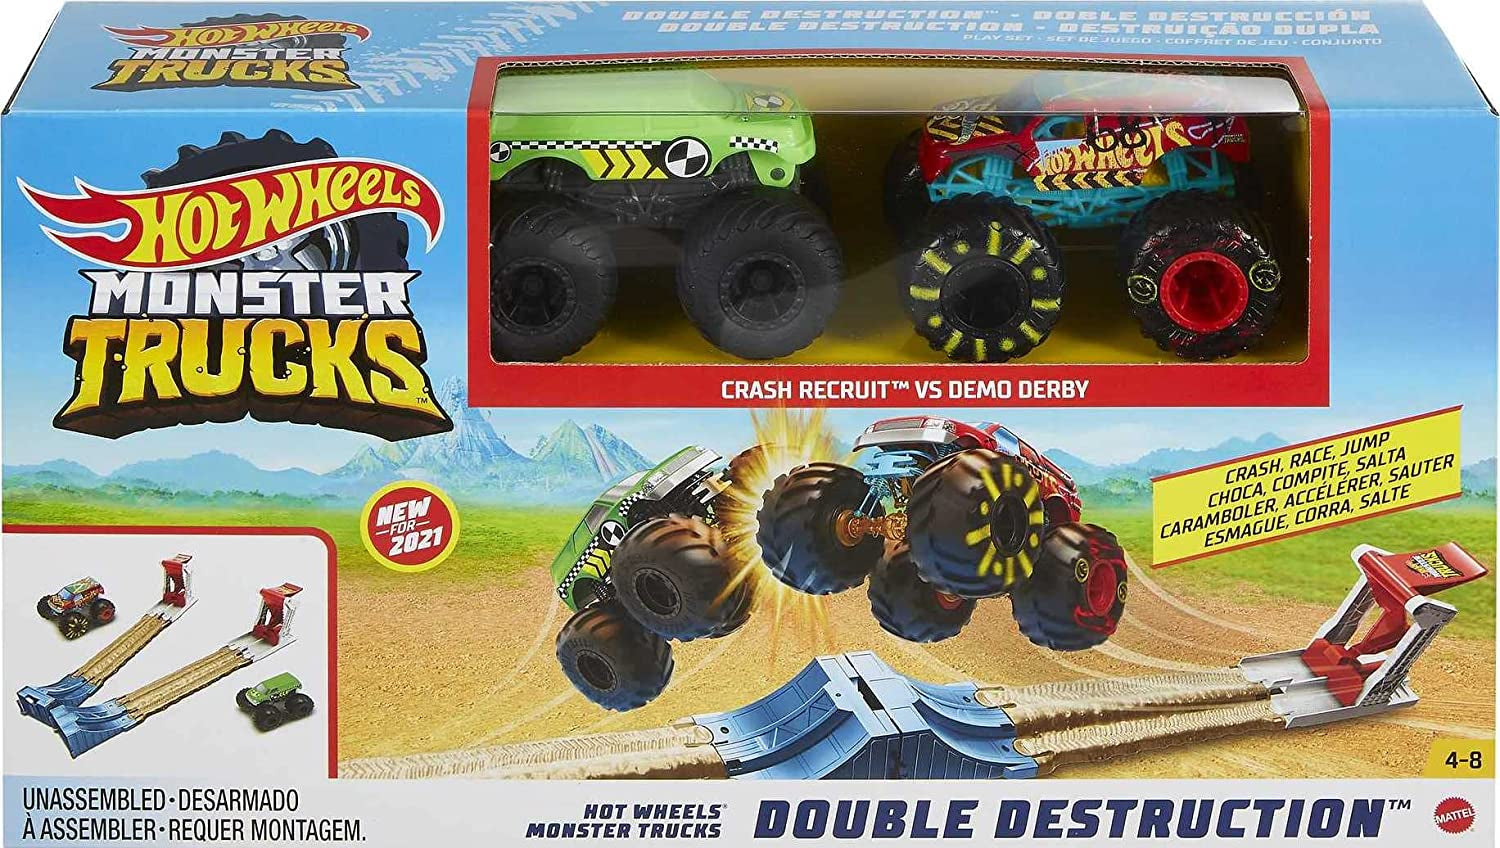 Hot Wheels Monster Trucks Double Destruction 3-In-1 Play Set with 1 1:64 Scale Die-Cast Metal Body Monster Truck, 1 Plastic Crash Dummy 2 Slam Launchers with Short Straight Tracks & Ramps